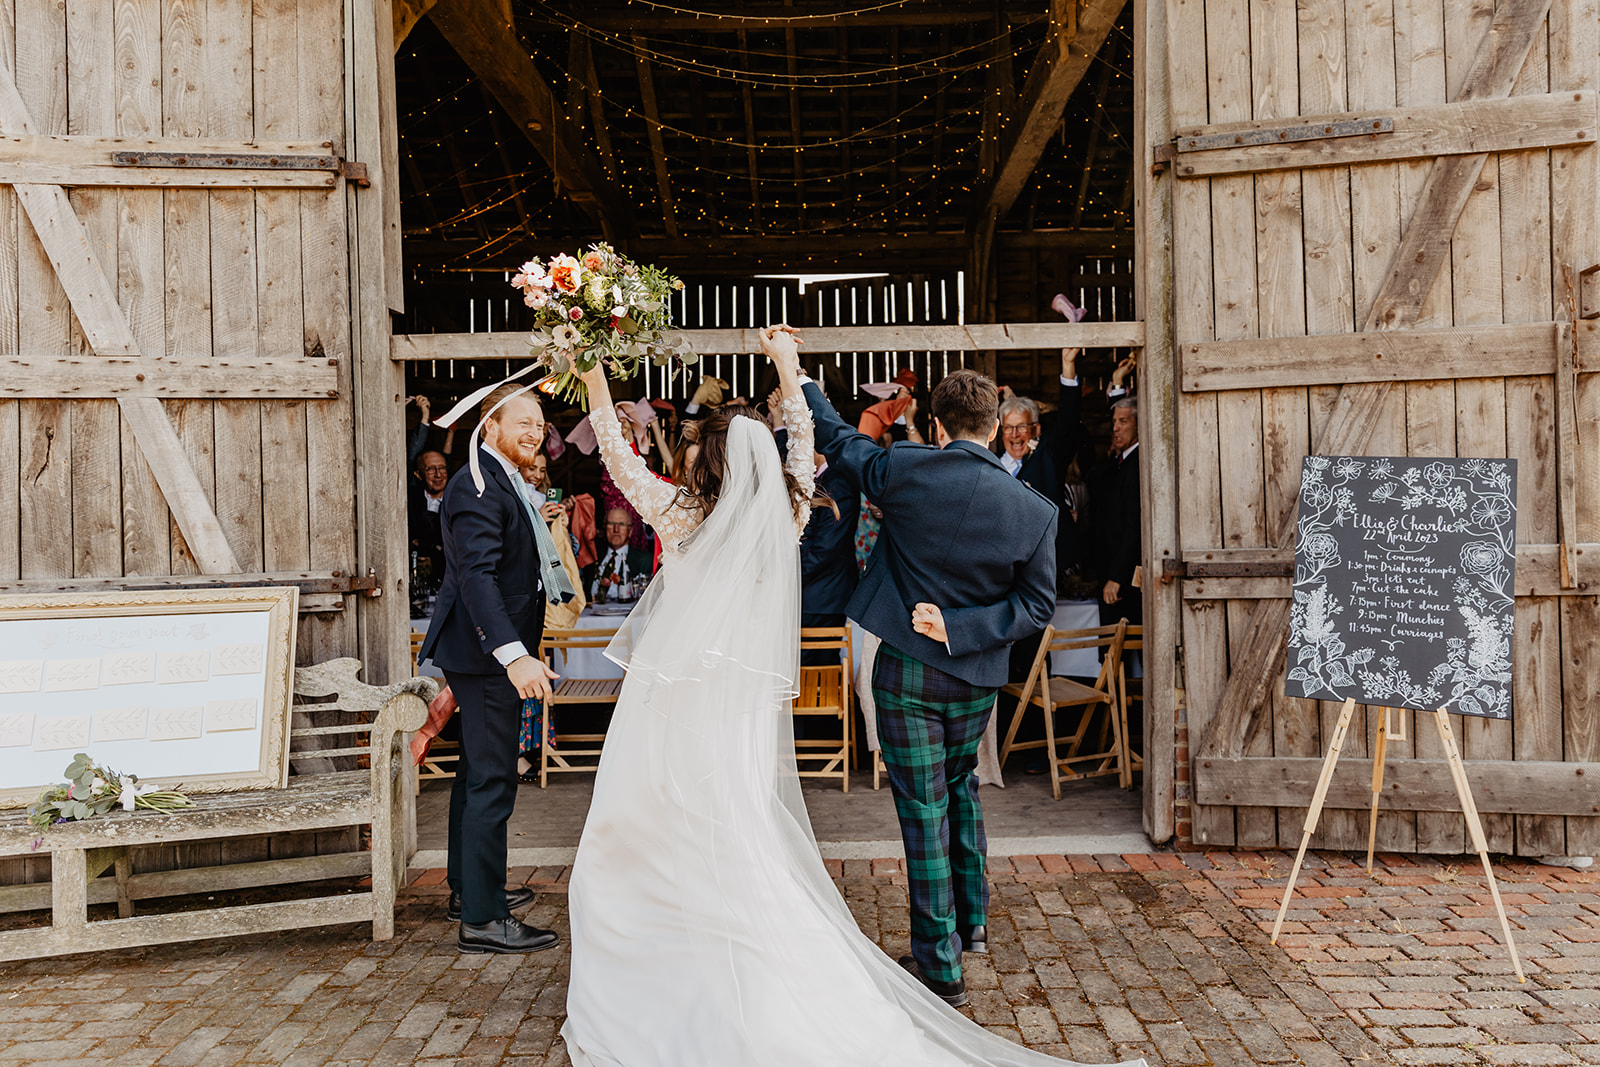 Bride and groom arrive at reception at a Secret Barn Wedding, West Sussex. By Olive Joy Photography